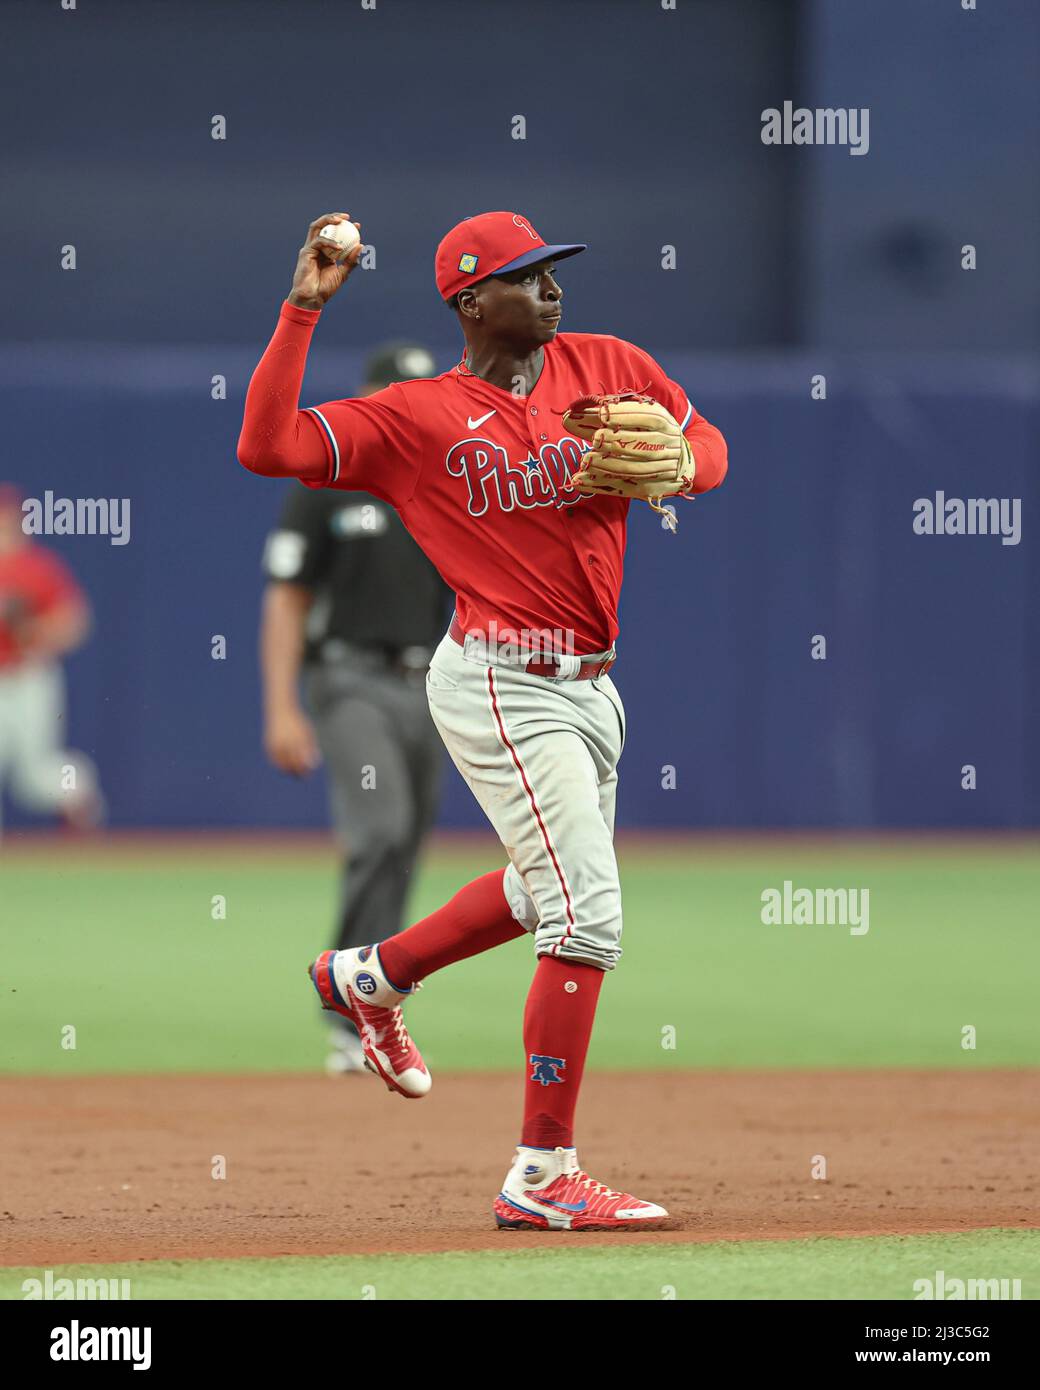 St. Petersburg, United States. 06th Apr, 2022. St. Petersburg, FL USA:  Philadelphia Phillies shortstop Didi Gregorius (18) throws to first for the  out during a spring training baseball game against the Tampa